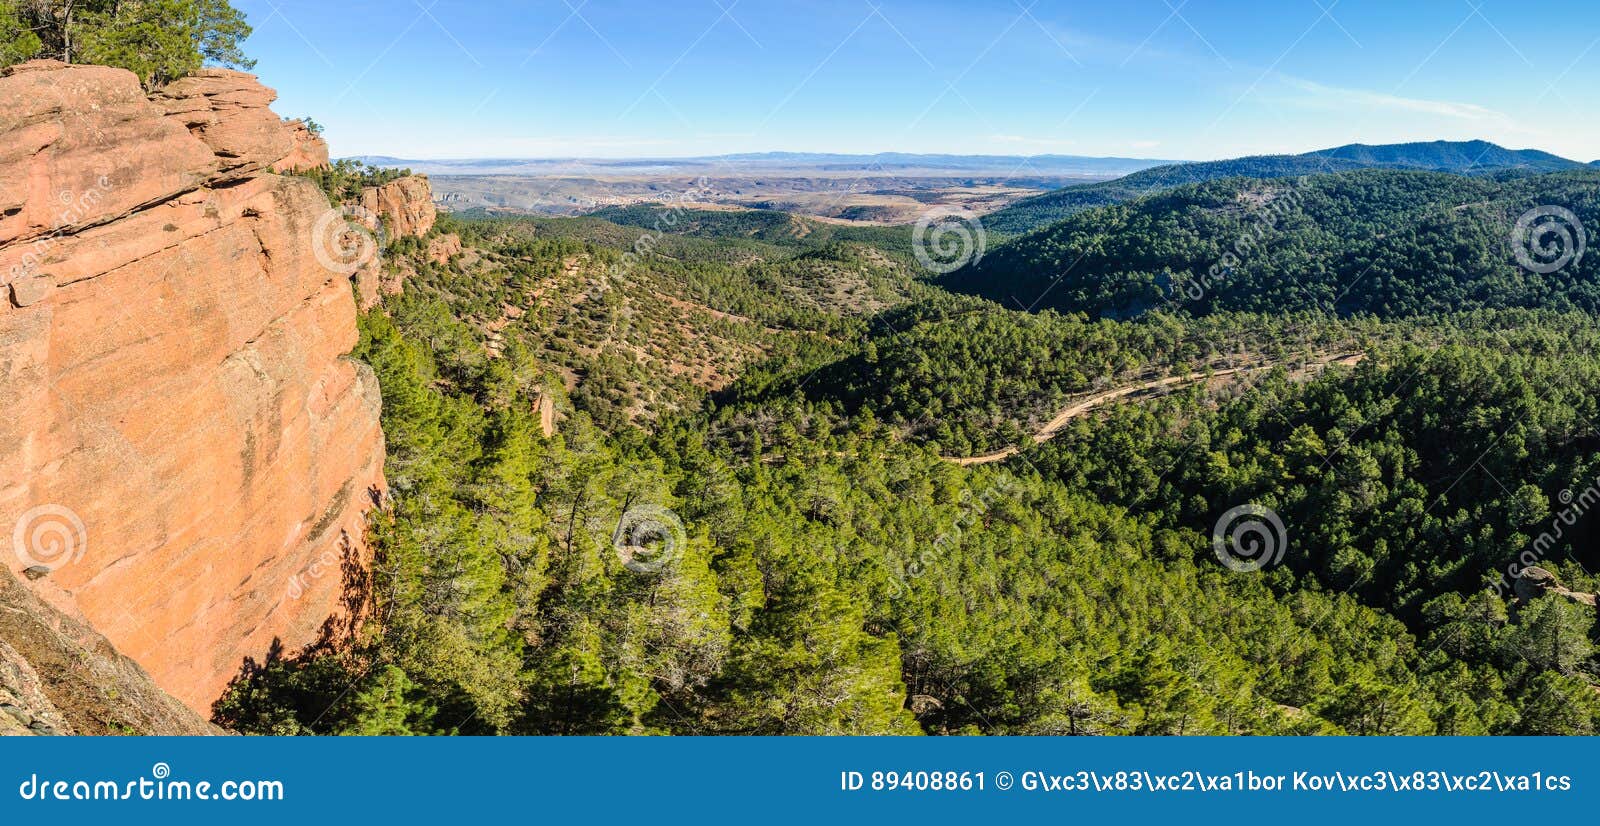 panoramic view in pinares del rodeno natural park, spain